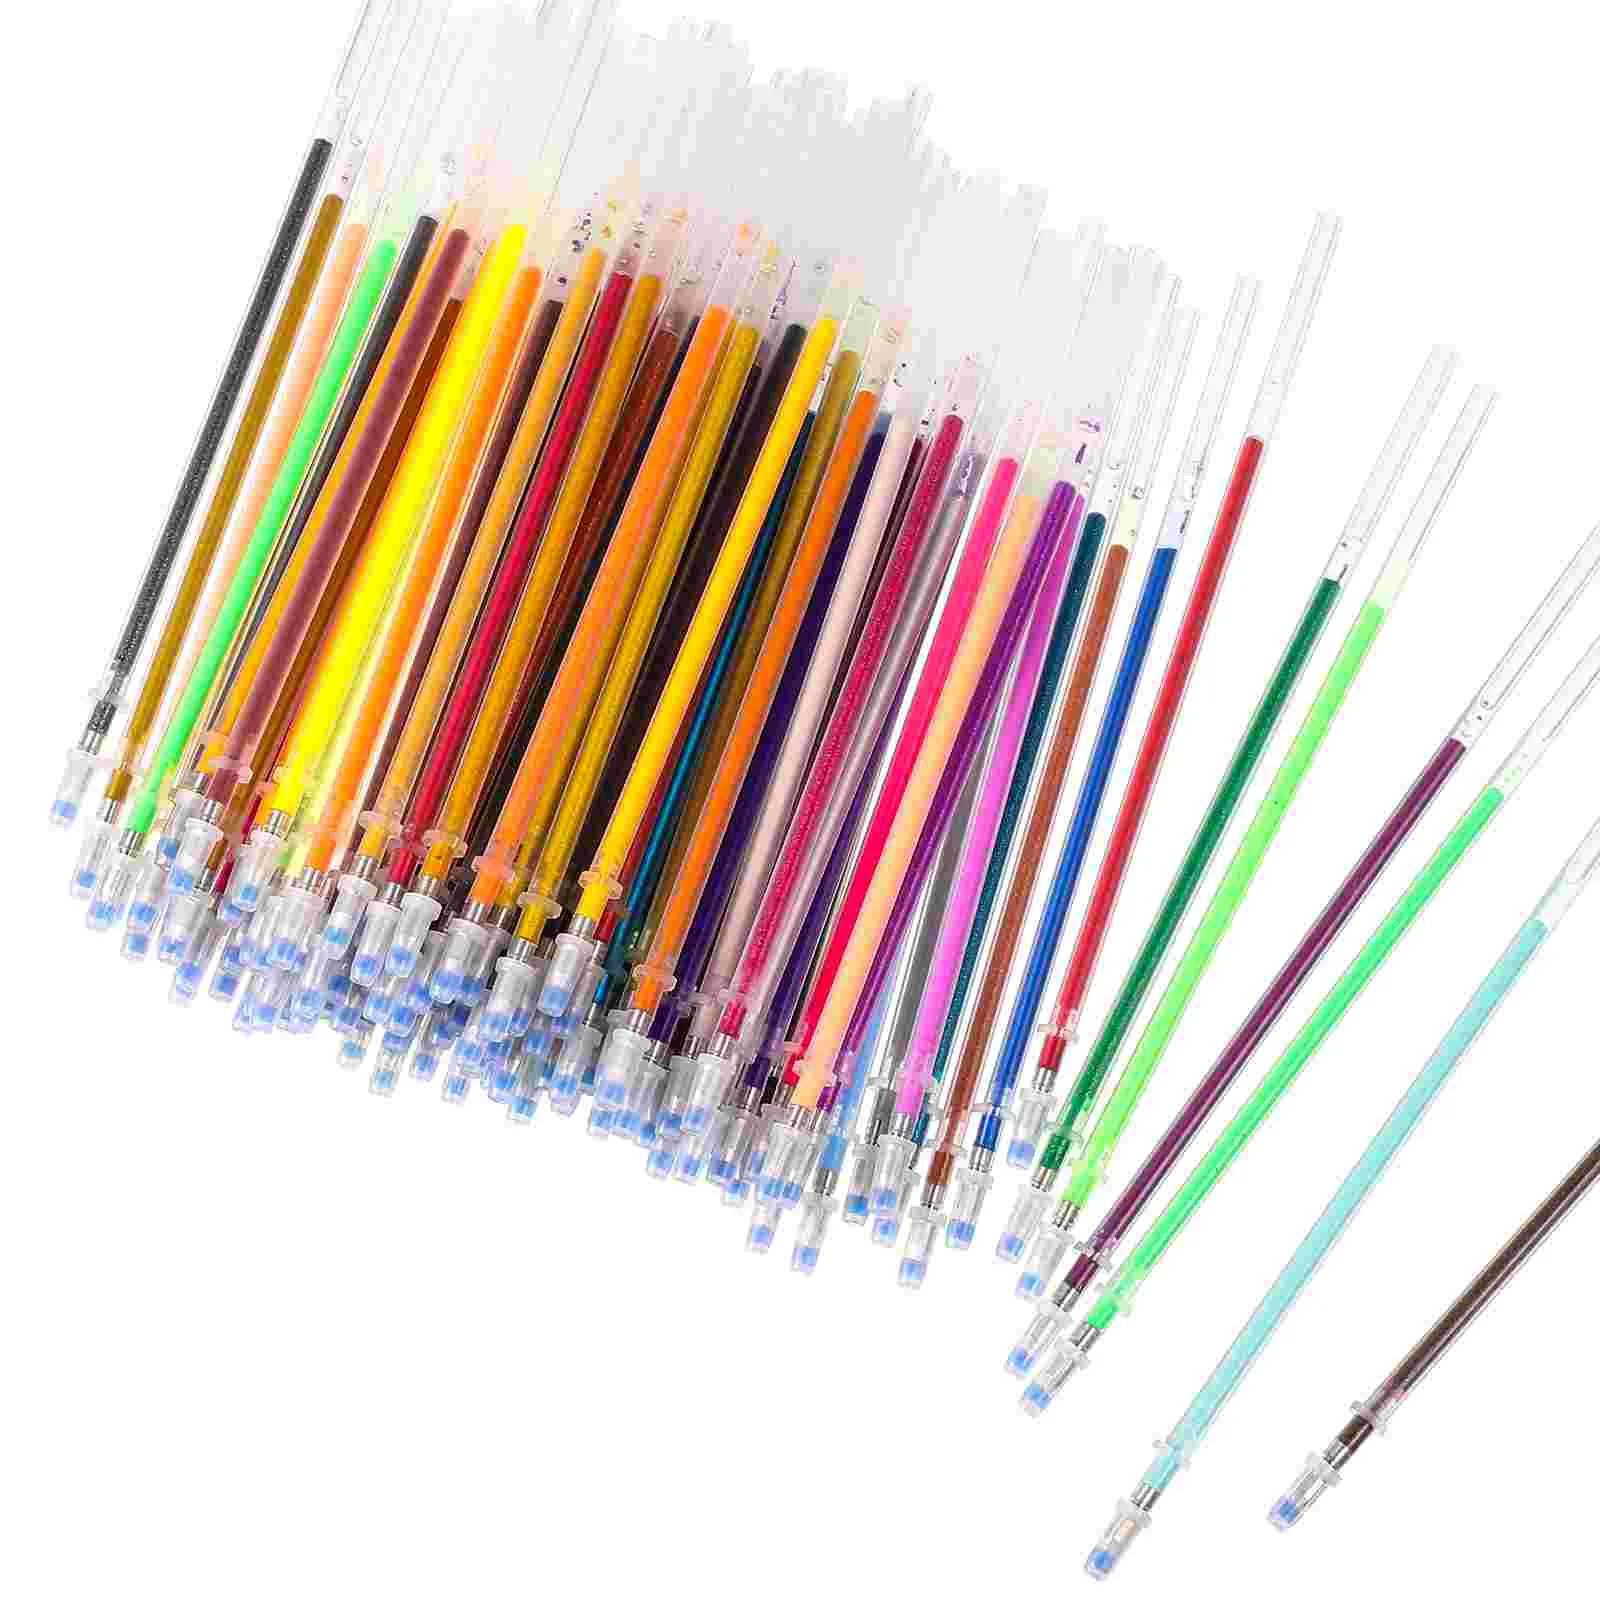 

Colored Gel Pen Refill Replacements Pens Colorful Refills Flash Bullet Tip Child